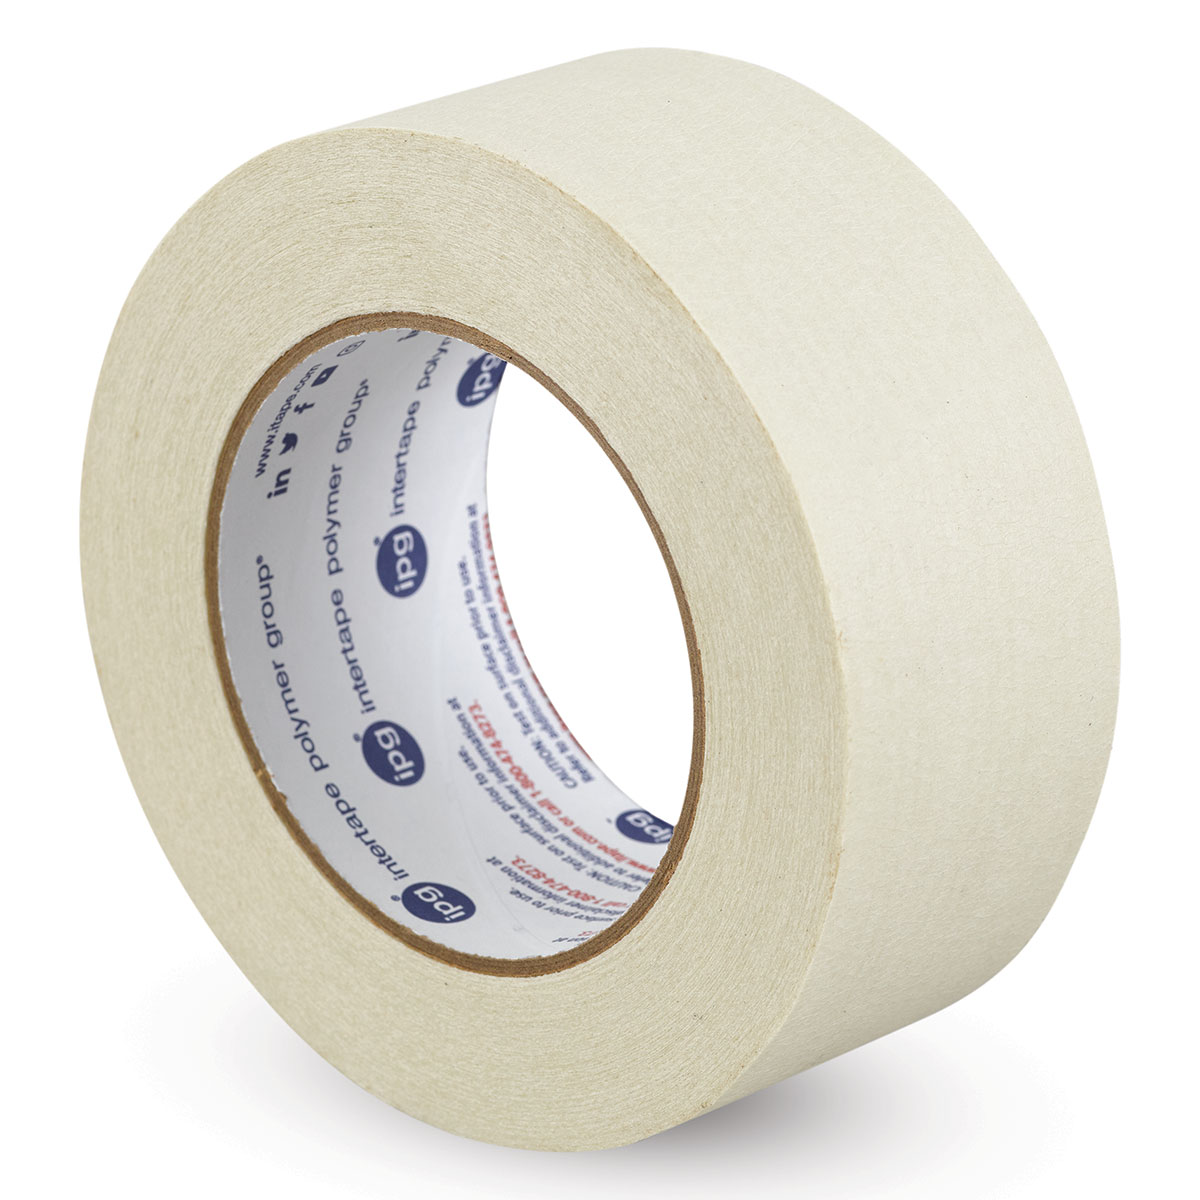 Intertape - Masking Tape: 38 mm Wide, 60 yd Long, 7.3 mil Thick